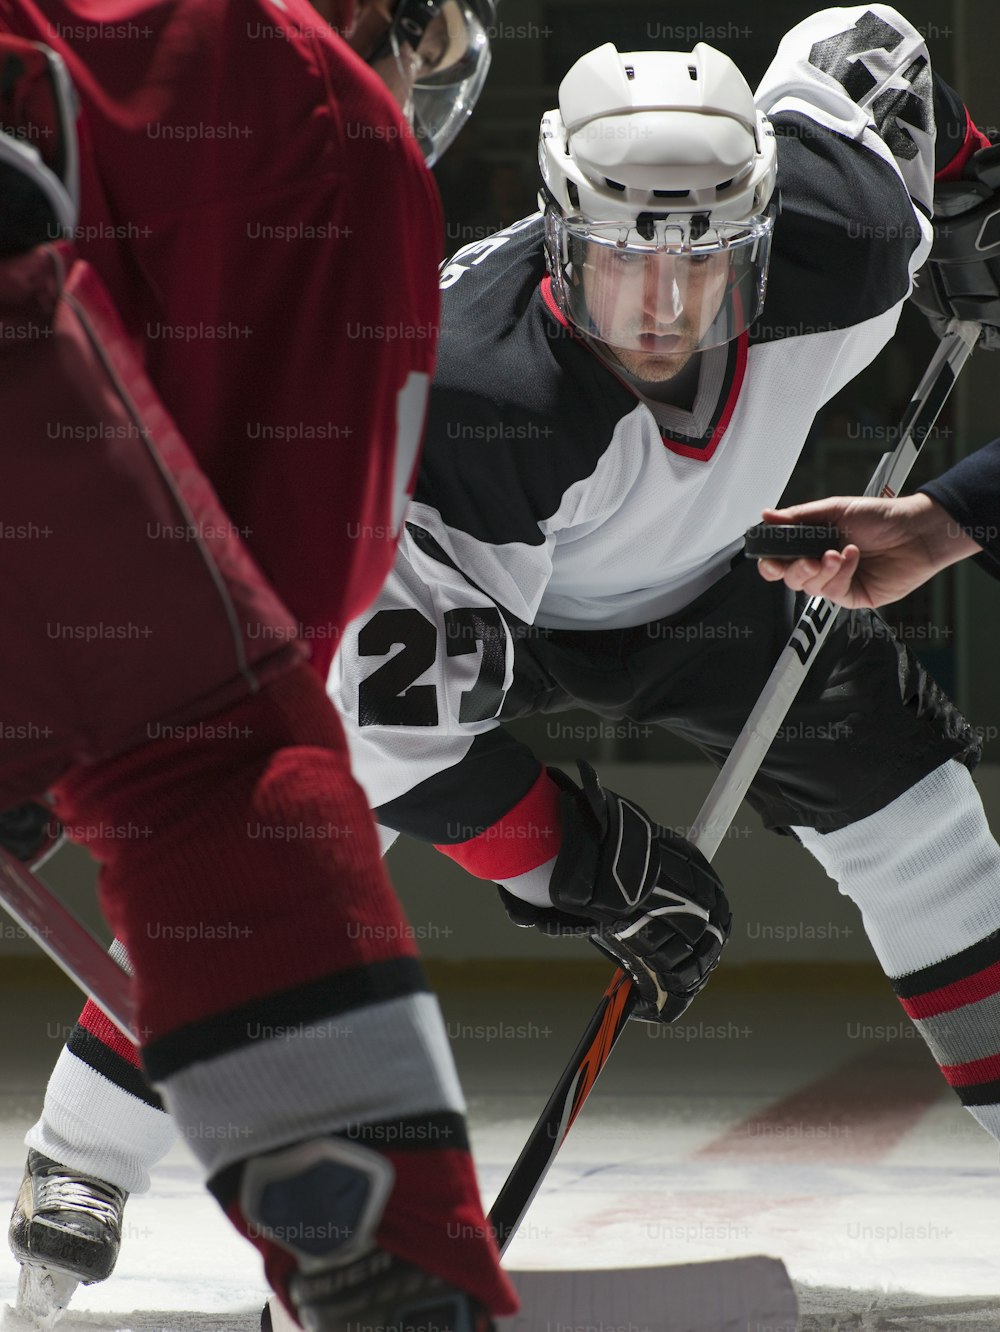 a hockey player in a black and white uniform